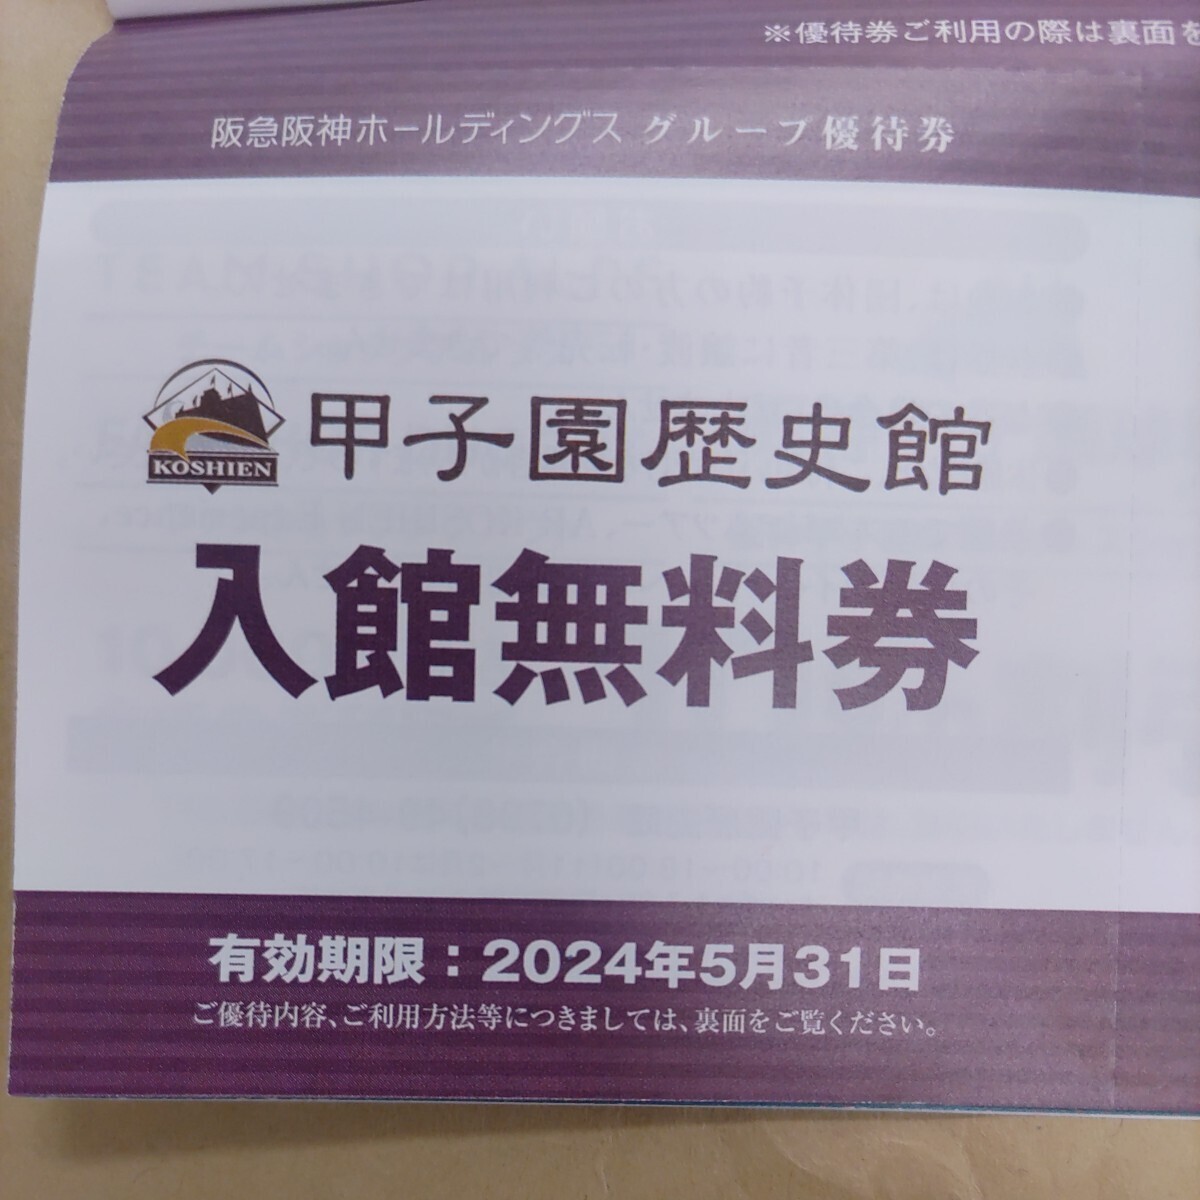 . sudden Hanshin group complimentary ticket. Koshien materials pavilion free admission ticket 2-4 sheets 1 jpy ( special delivery correspondence, letter pack post service 370) postage included 371 jpy, most short is next day . delivery is done!